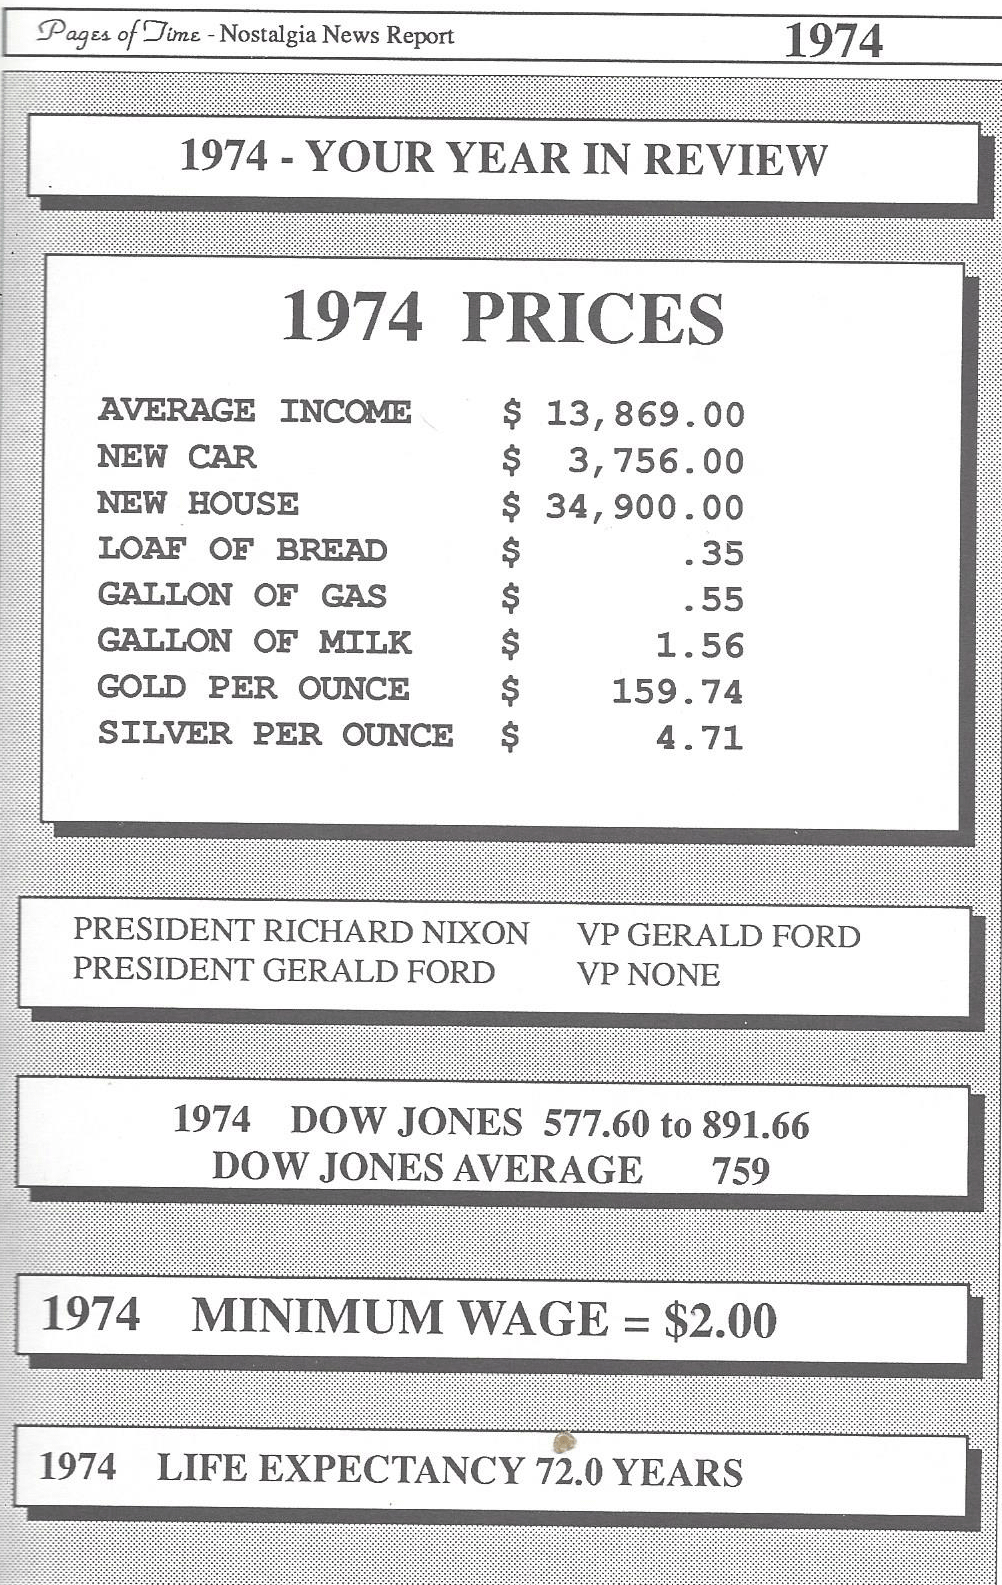 1974 - Your Year in Review Prices